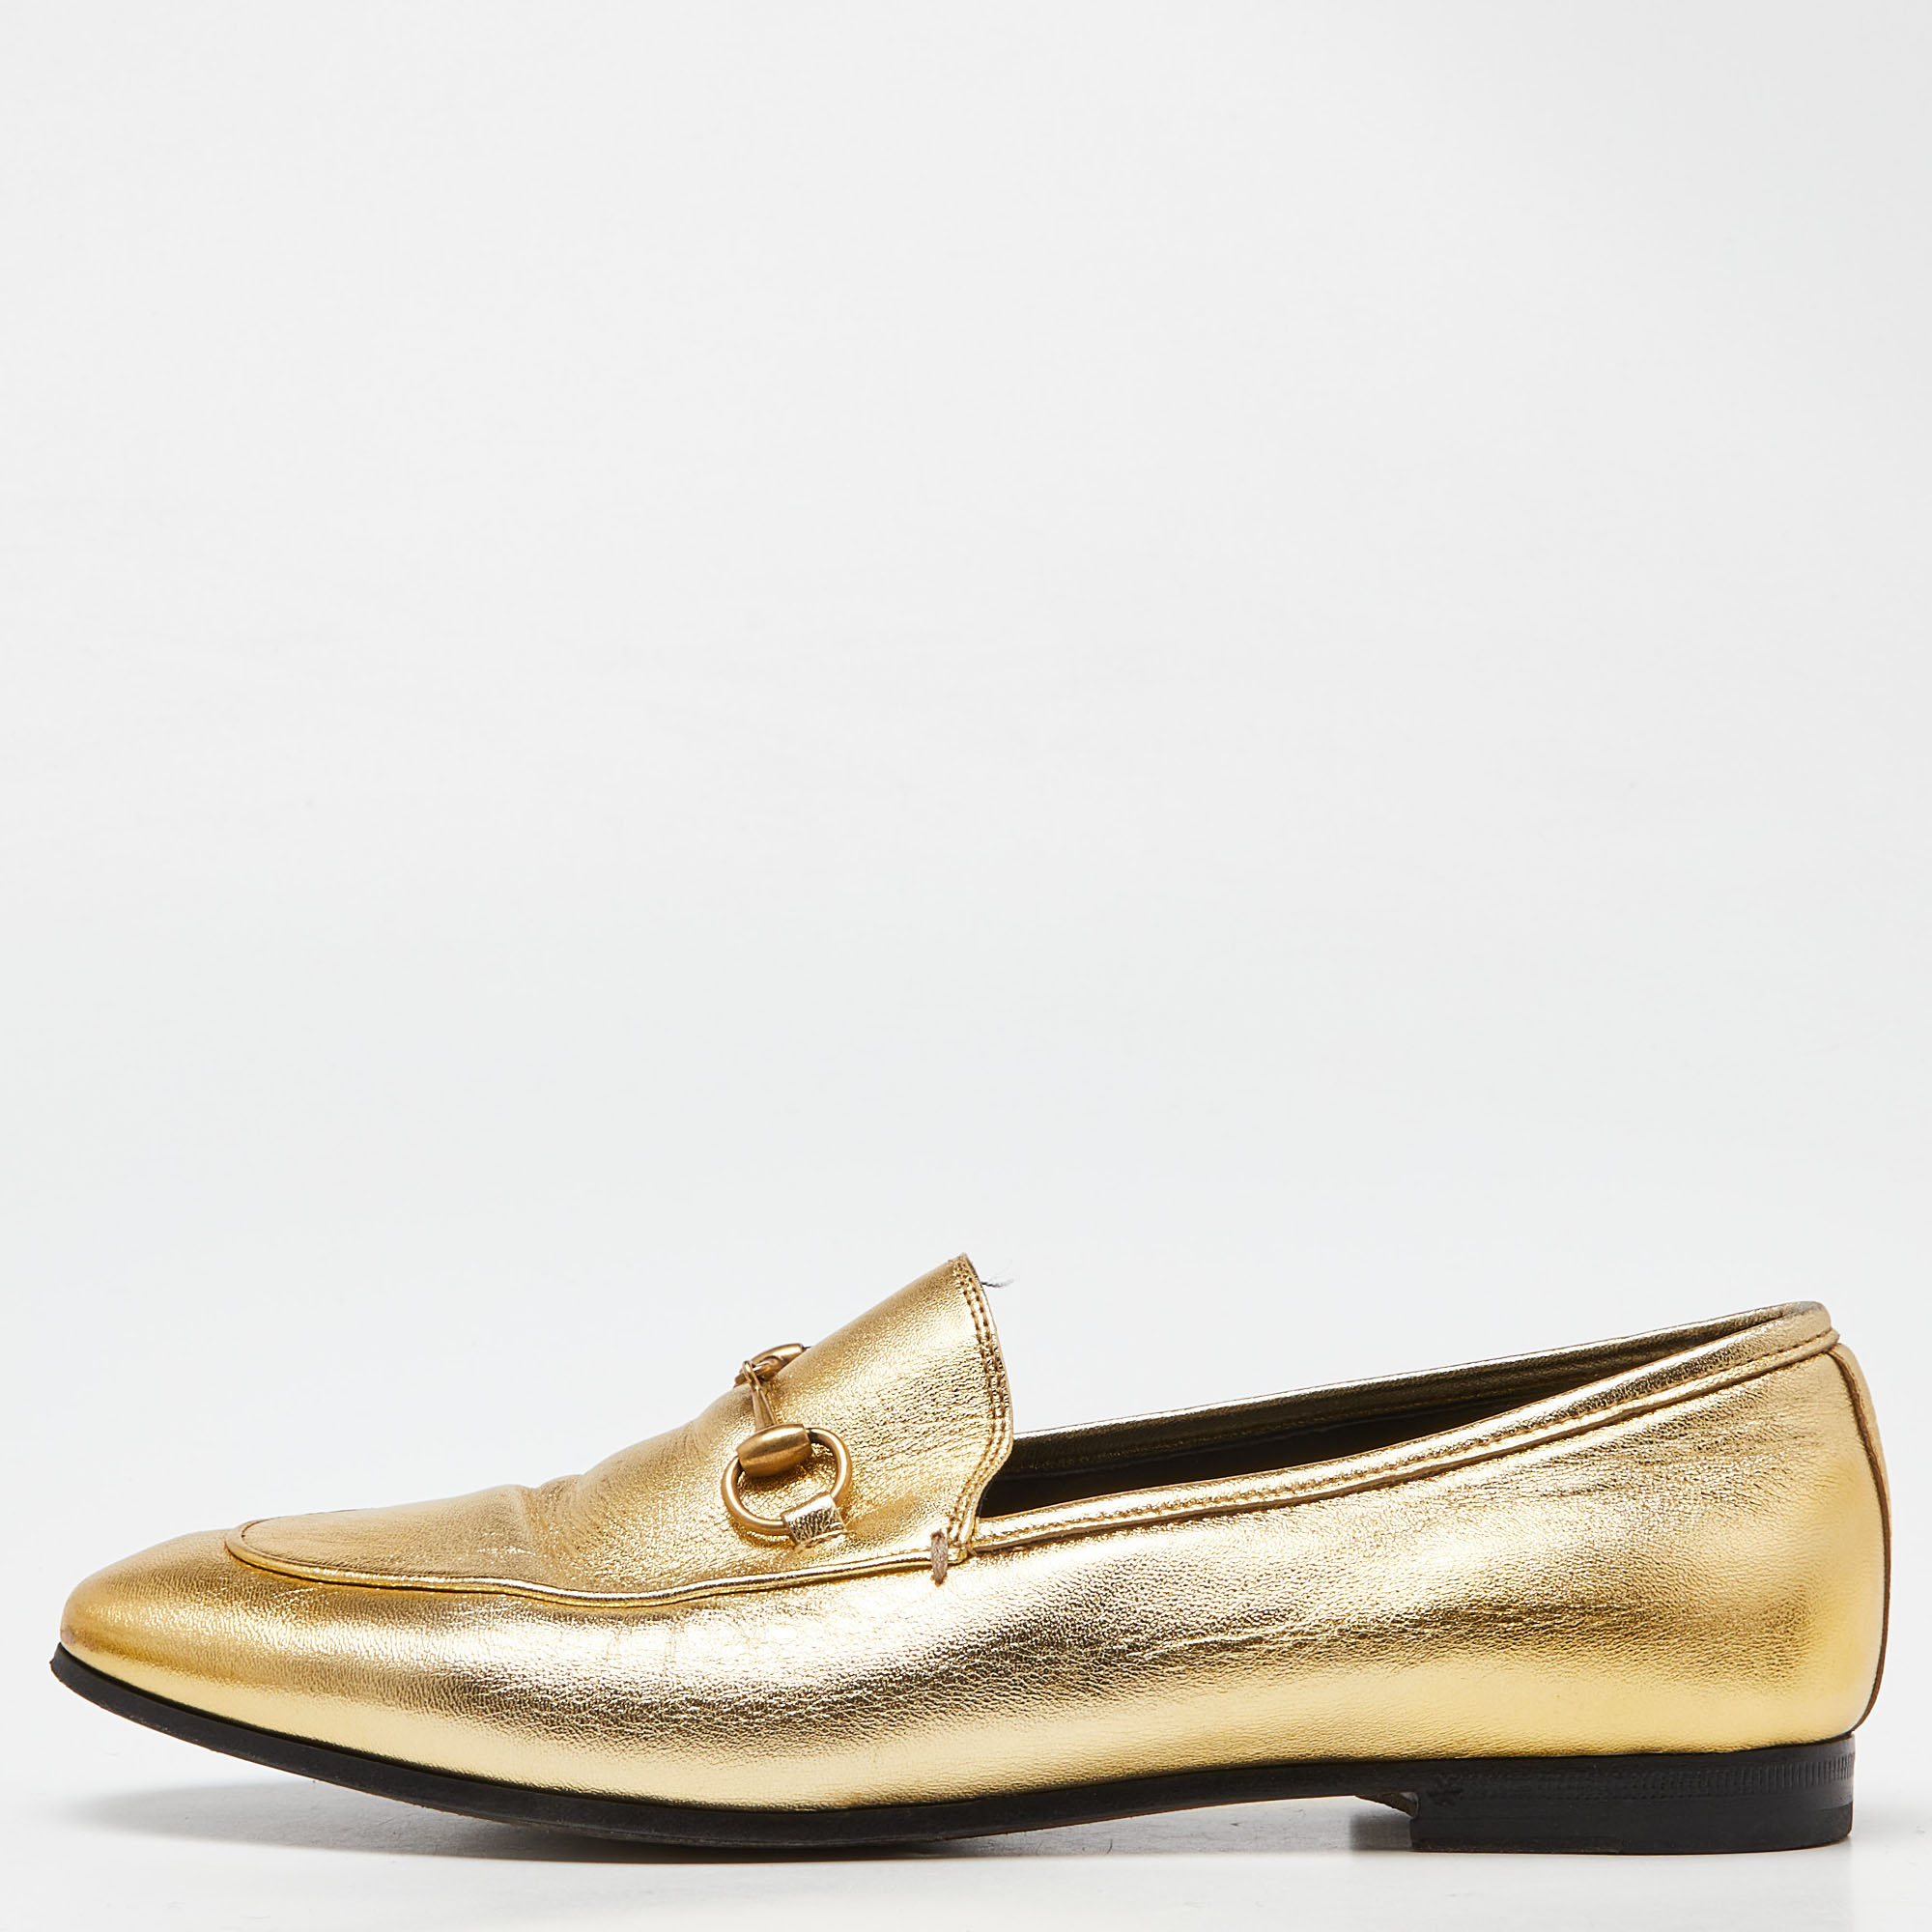 Gucci gold leather jordaan loafers size 39